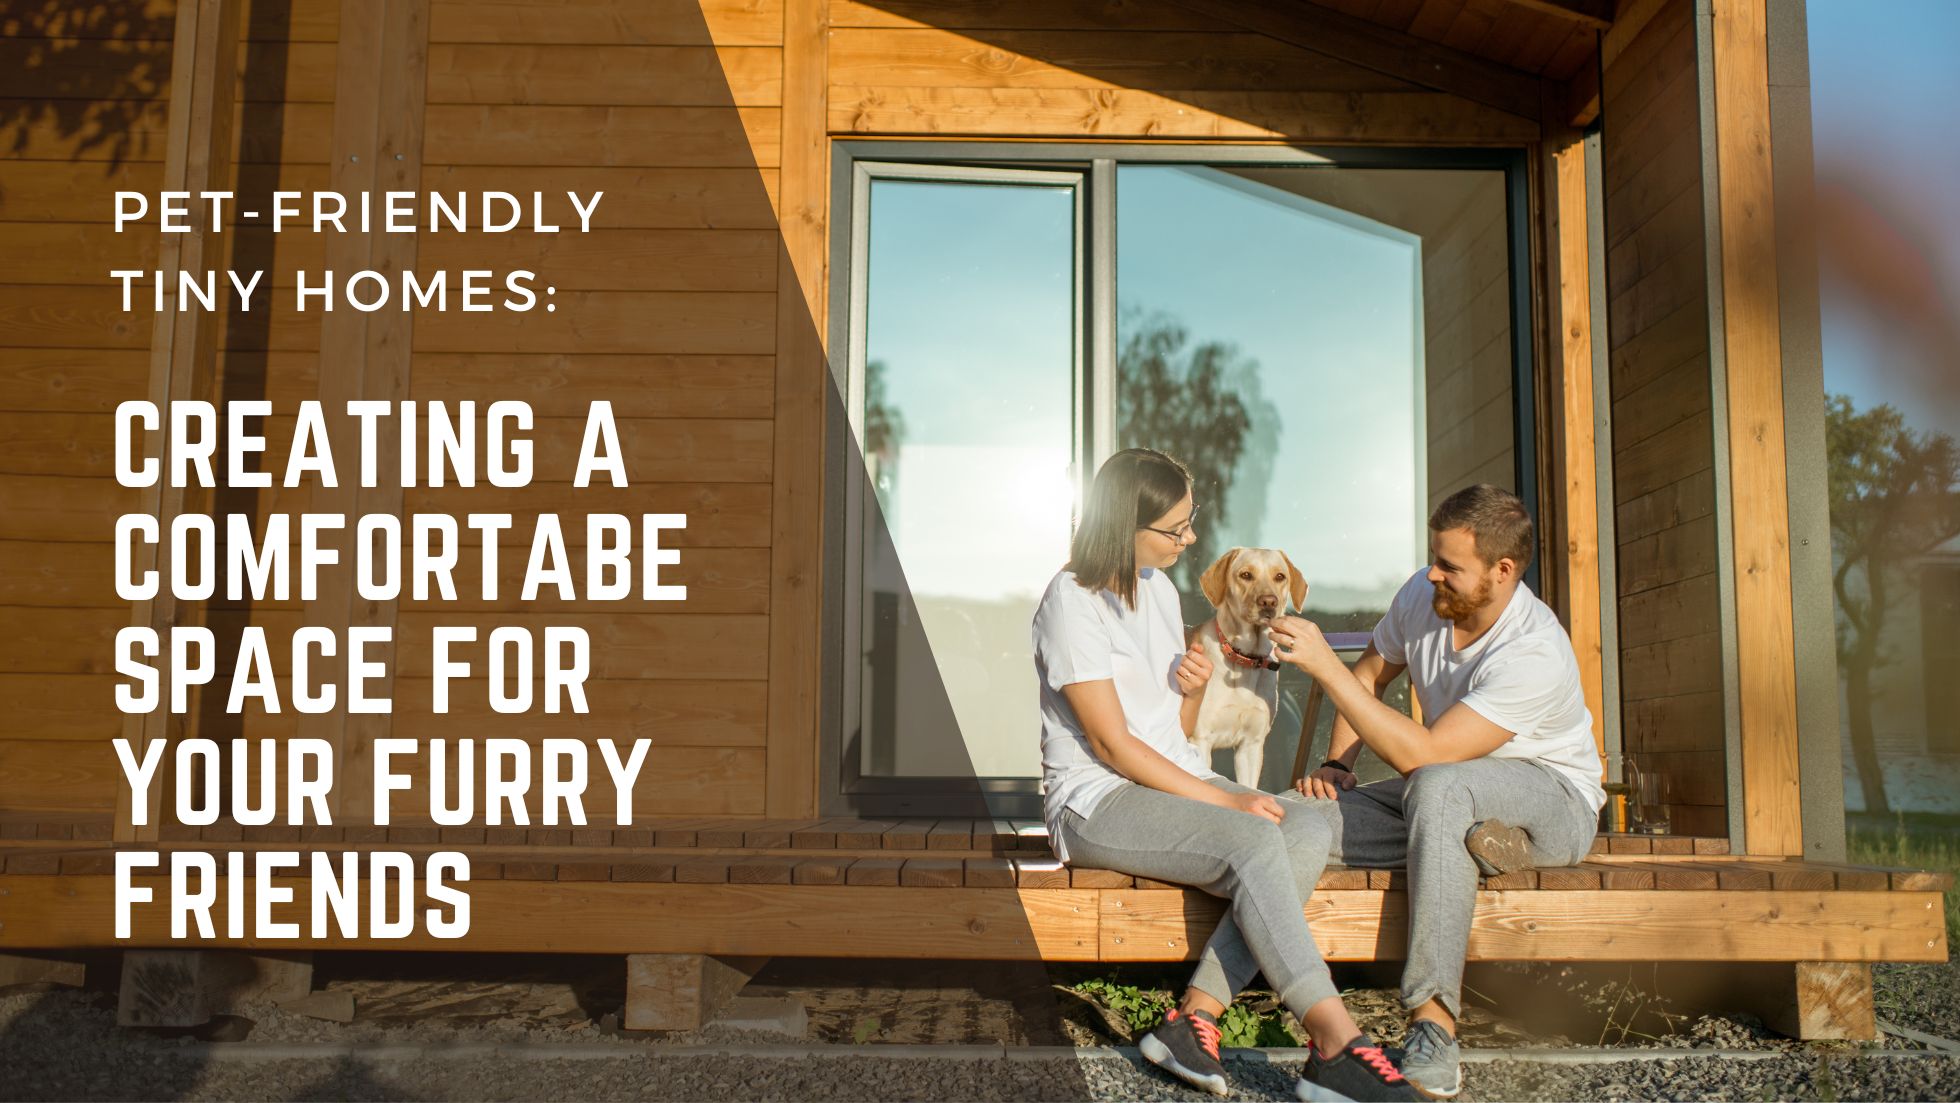 This blog will explore various tips and ideas to make your tiny home pet-friendly, from optimizing space to incorporating pet-friendly features.